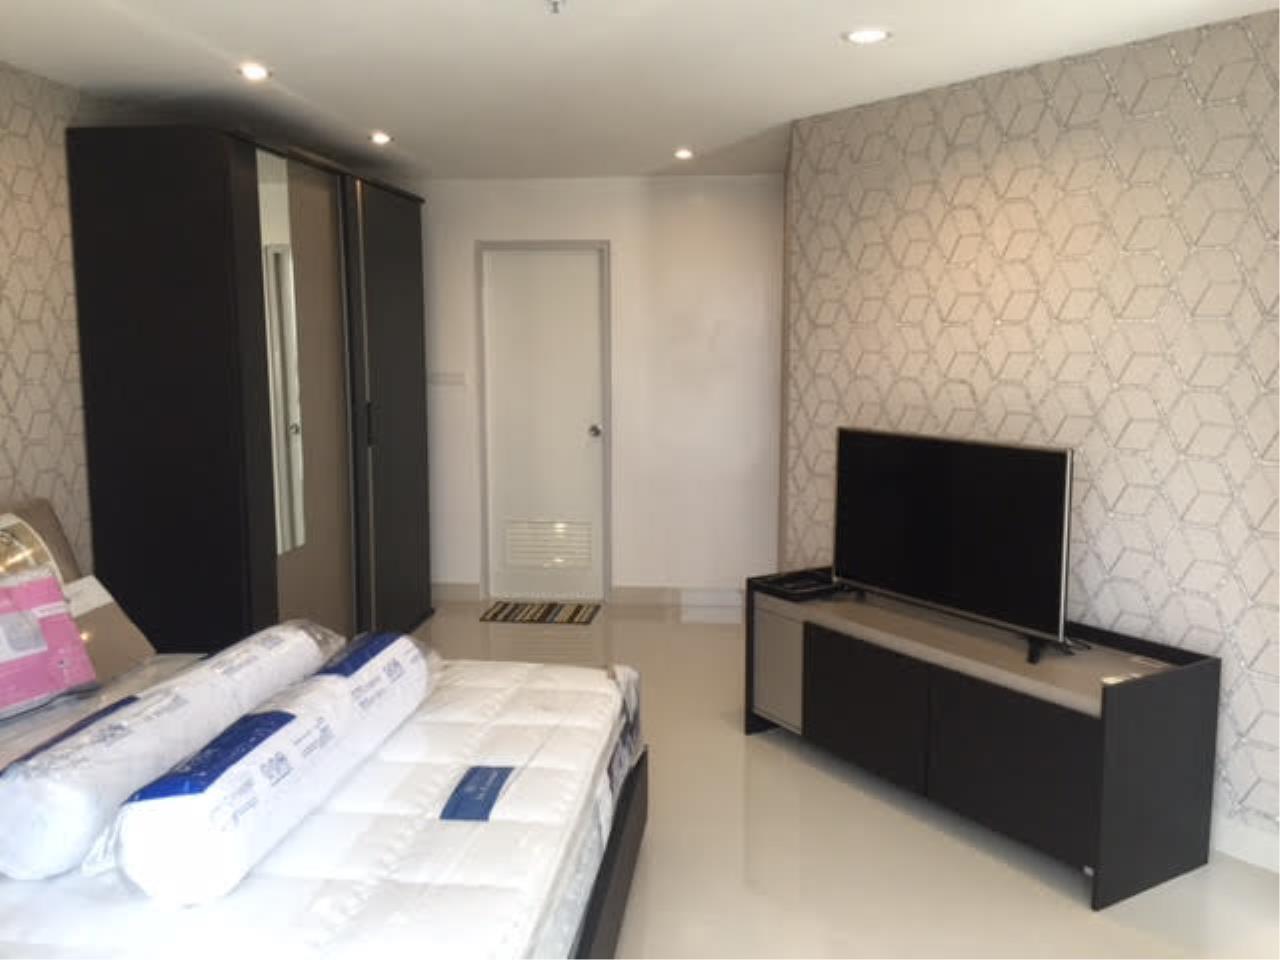 Century21 Skylux Agency's The Waterford Diamond / Condo For Rent / 2 Bedroom / 88 SQM / BTS Phrom Phong / Bangkok 7